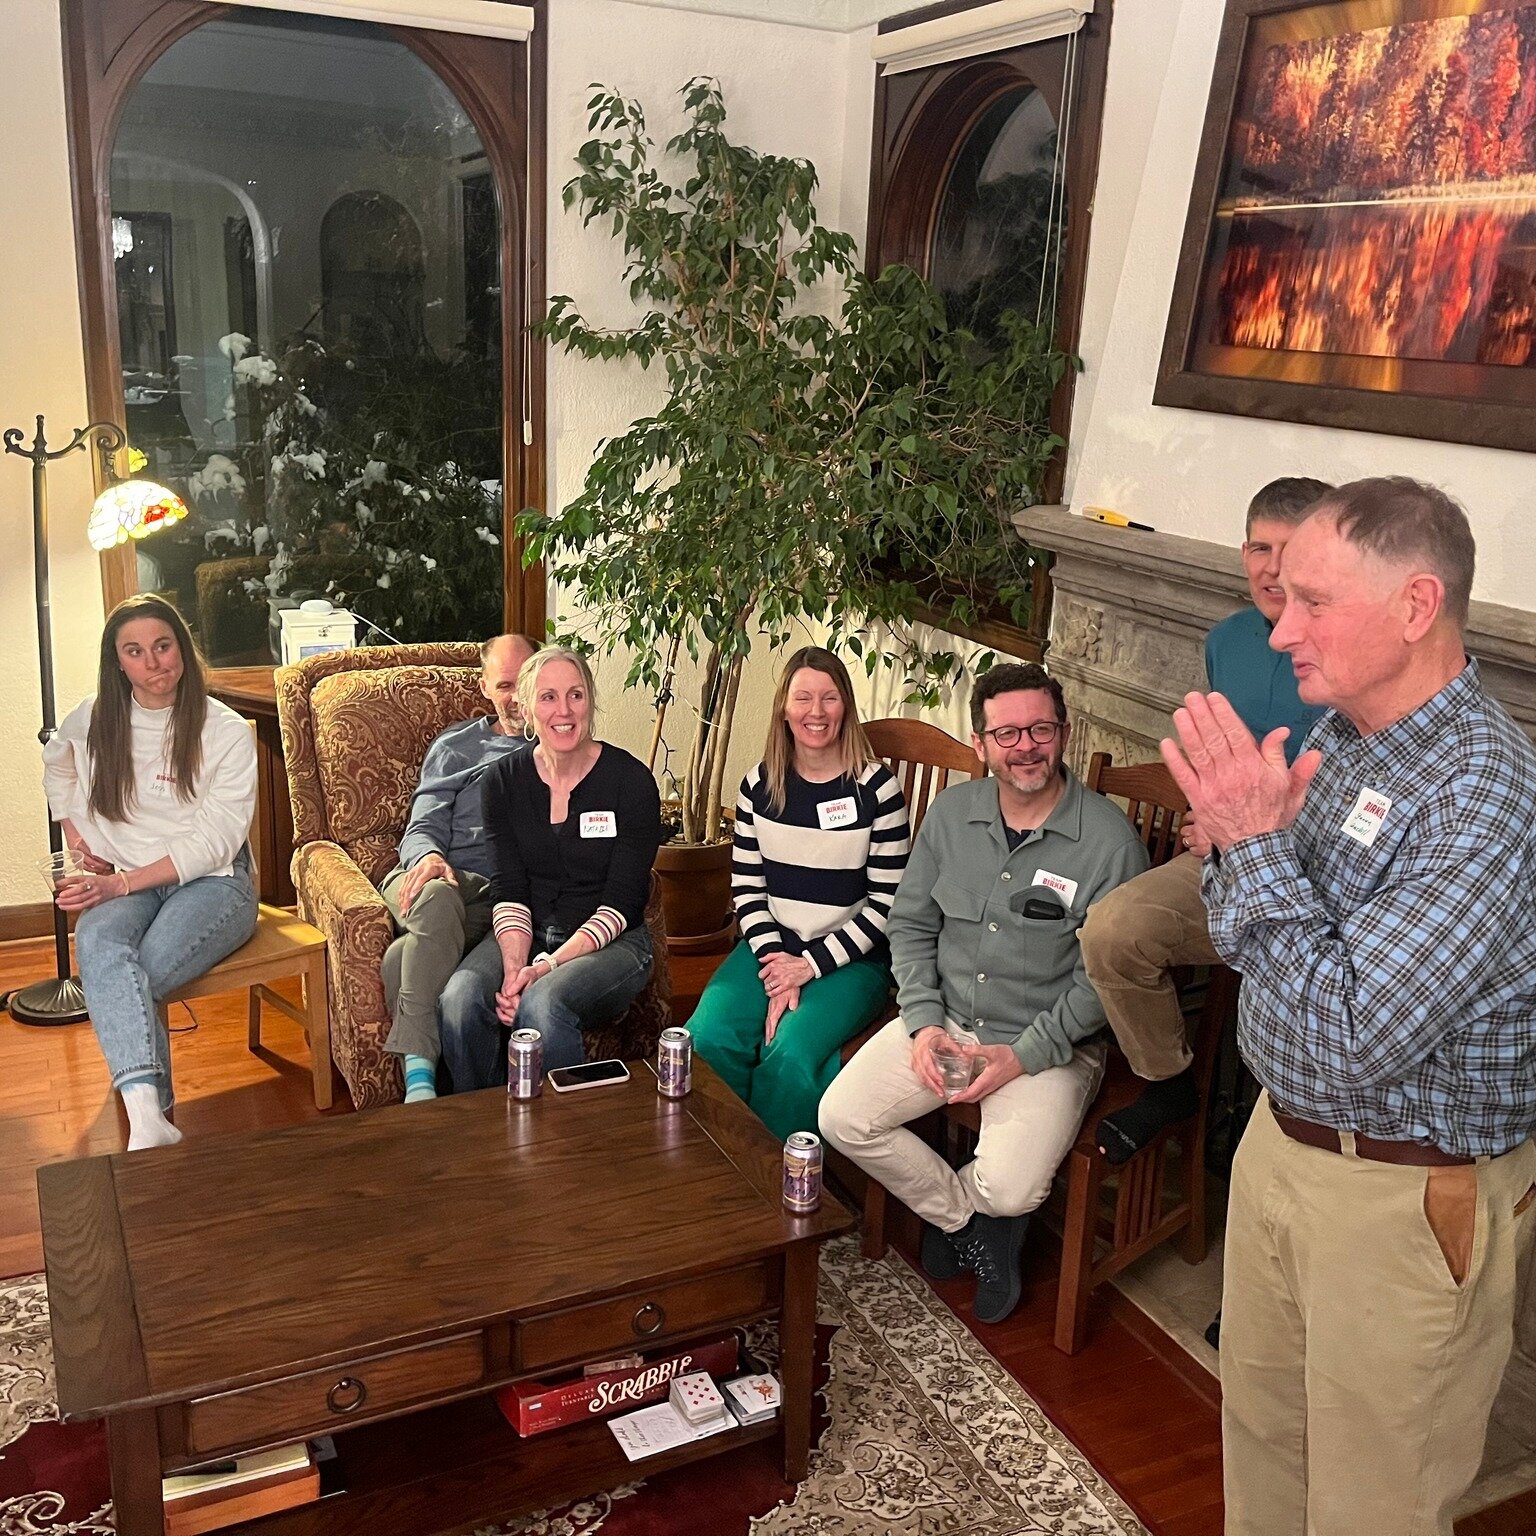 Last Friday night was a remarkable walk down memory lane, as we reunited with the original Team Birke alumni! 

Nearly 35 years ago, the Team Birke Ski Education Foundation was established with a heartfelt mission: to advance cross-country ski coachi